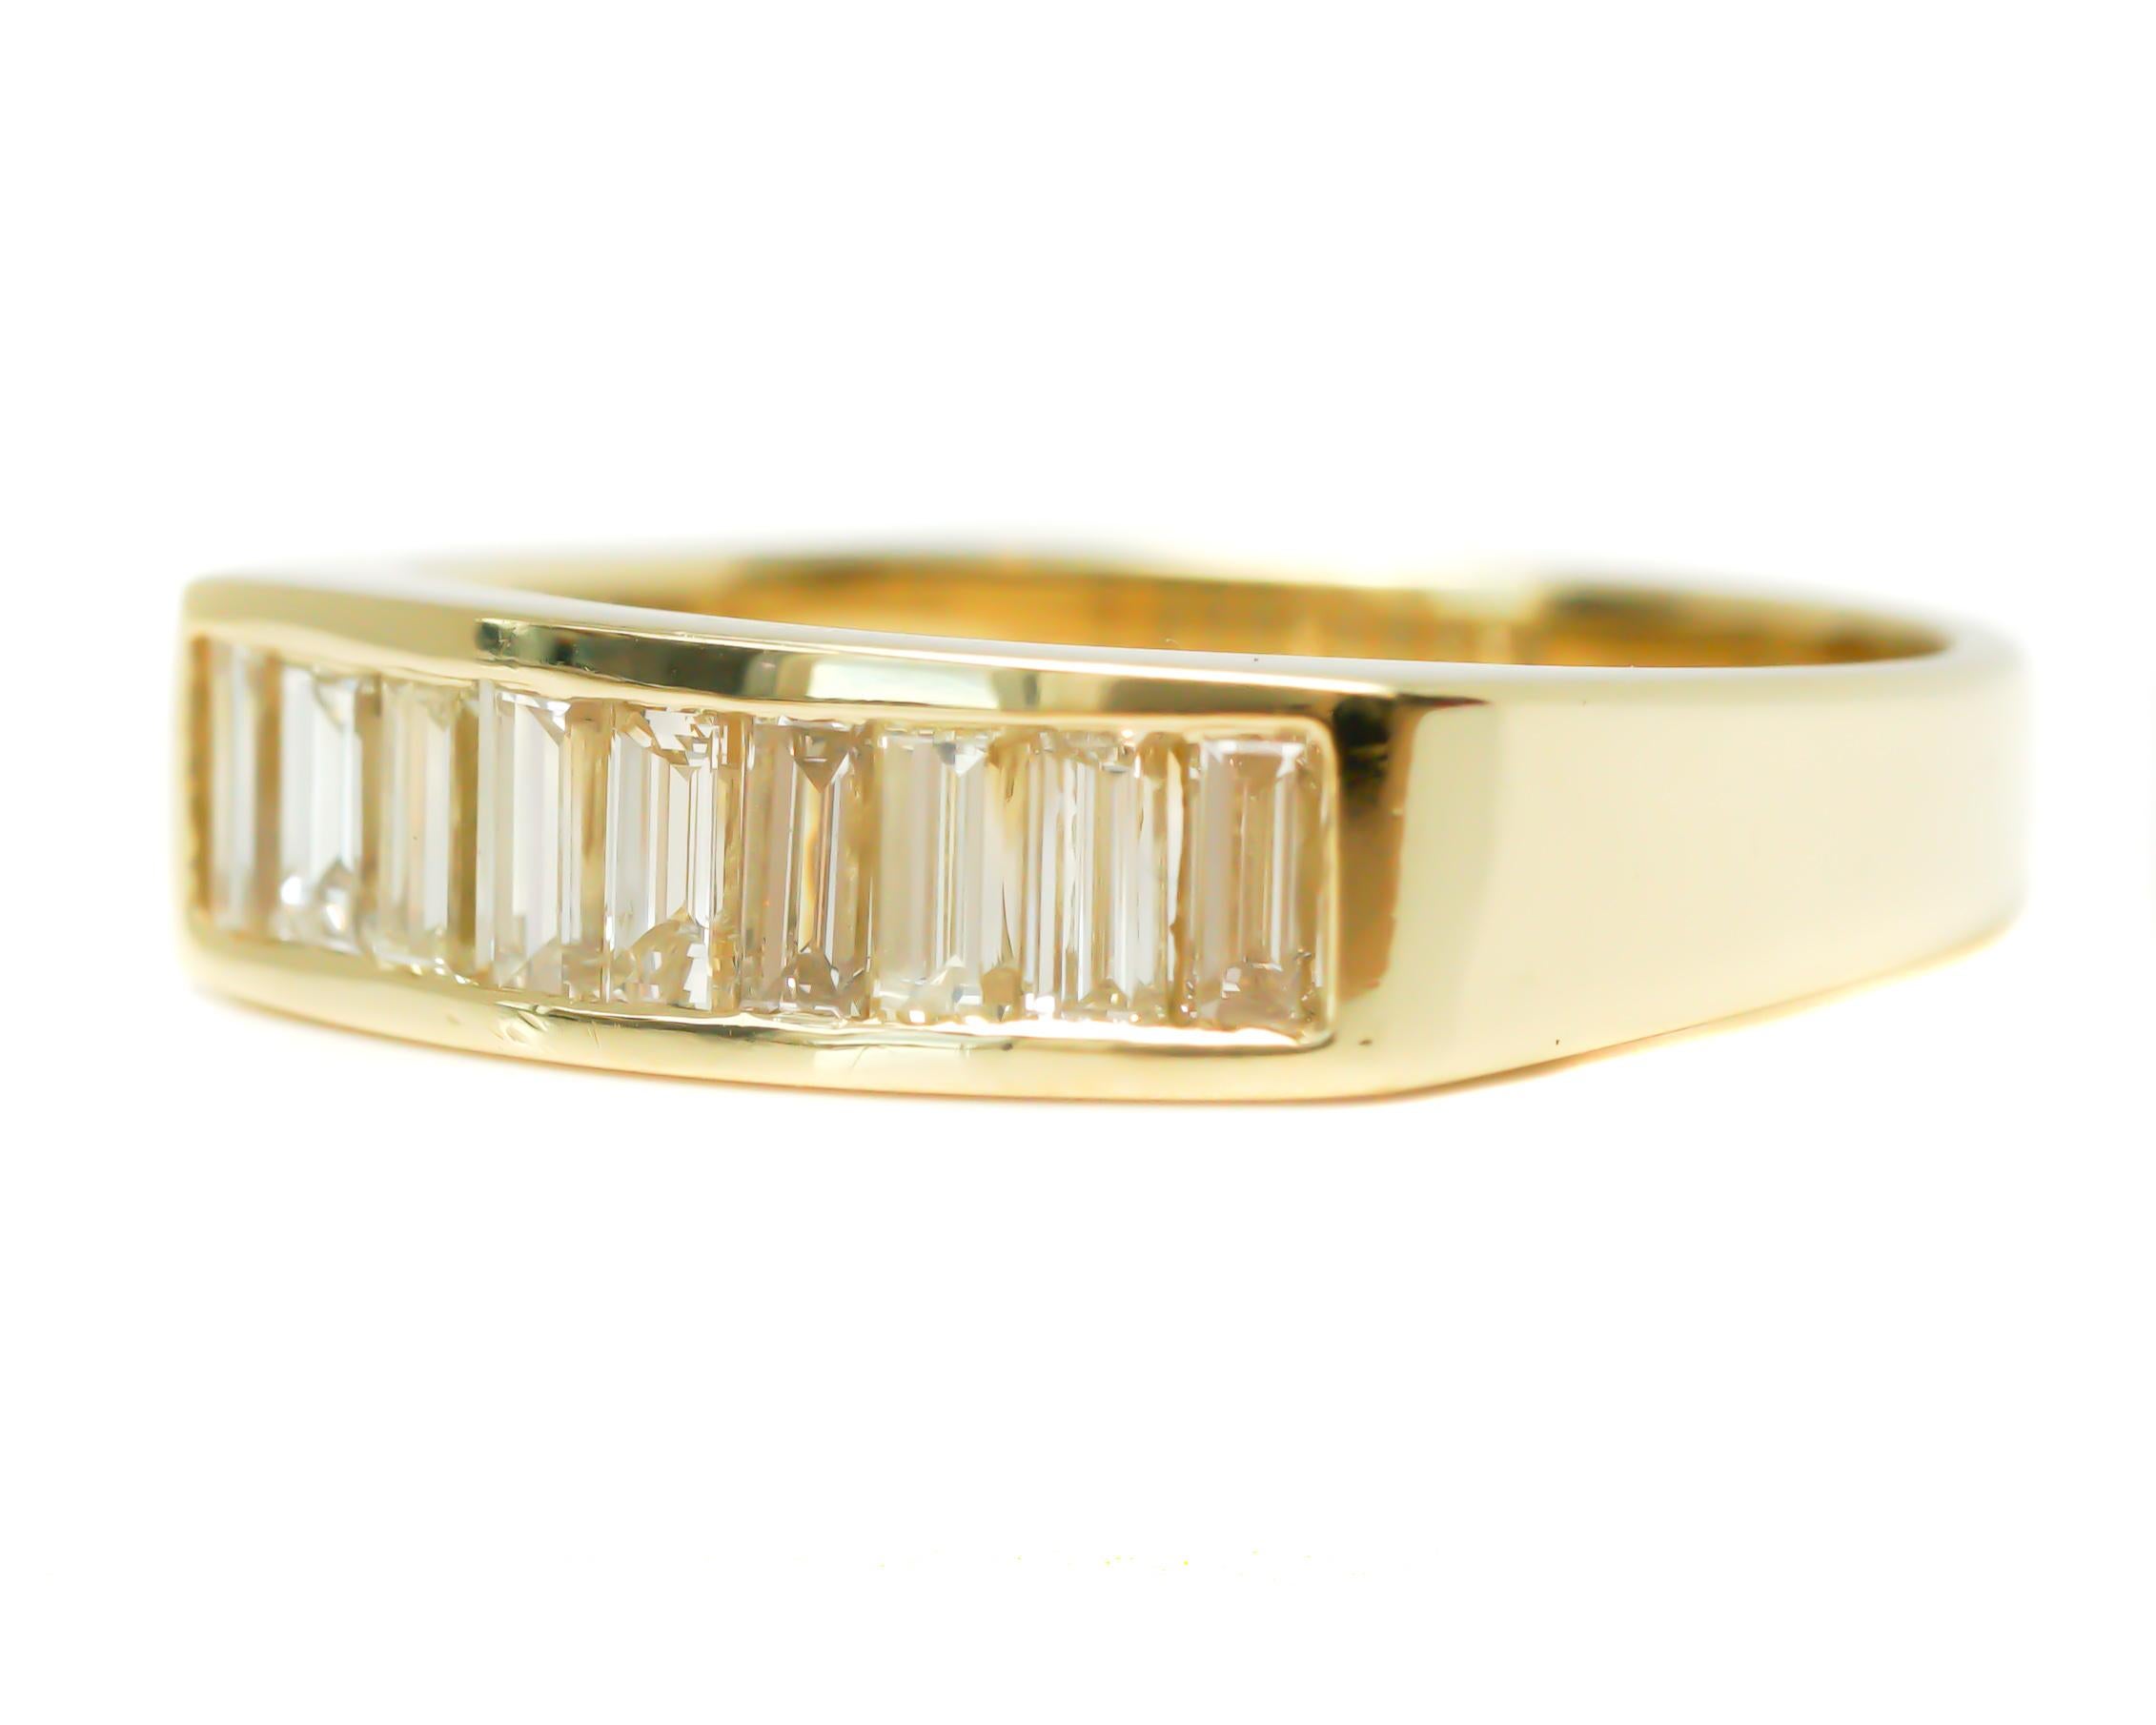 Diamond Band Ring - 18 Karat Yellow Gold, Diamonds

Features:
1.0 carat total Emerald cut, Nearly Flawless Diamonds
18 karat Yellow Gold
Band width tapers from 5.75 - 3.25 millimeters
Finger to top of ring measures 2.5 millimeters
Ring fits a size